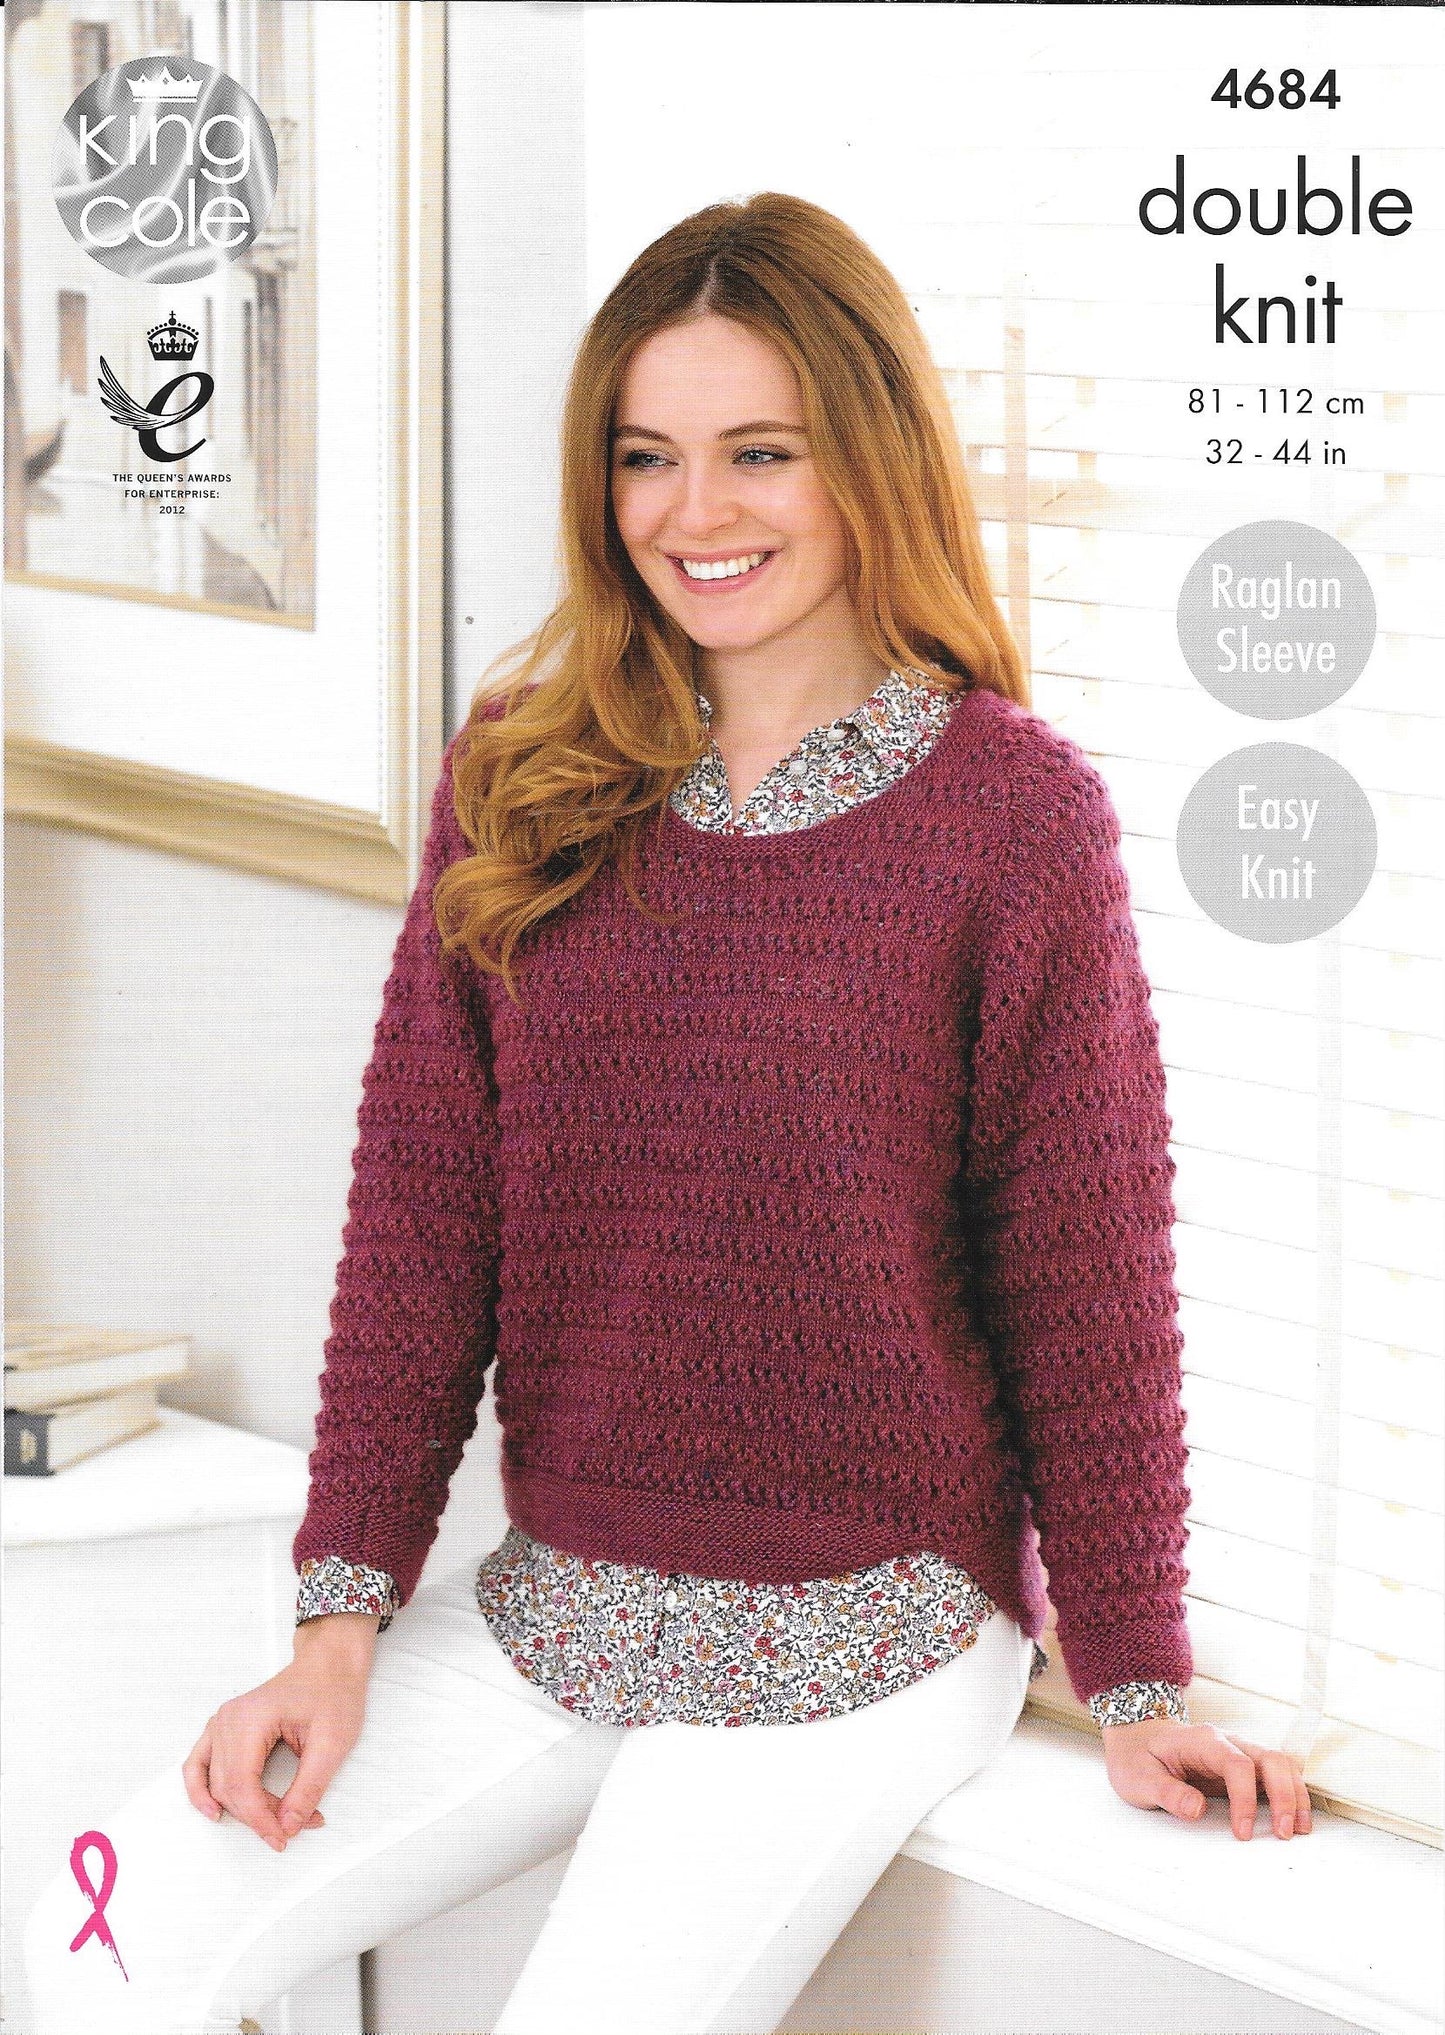 4684 King Cole dk ladies cardigan and sweater knitting pattern